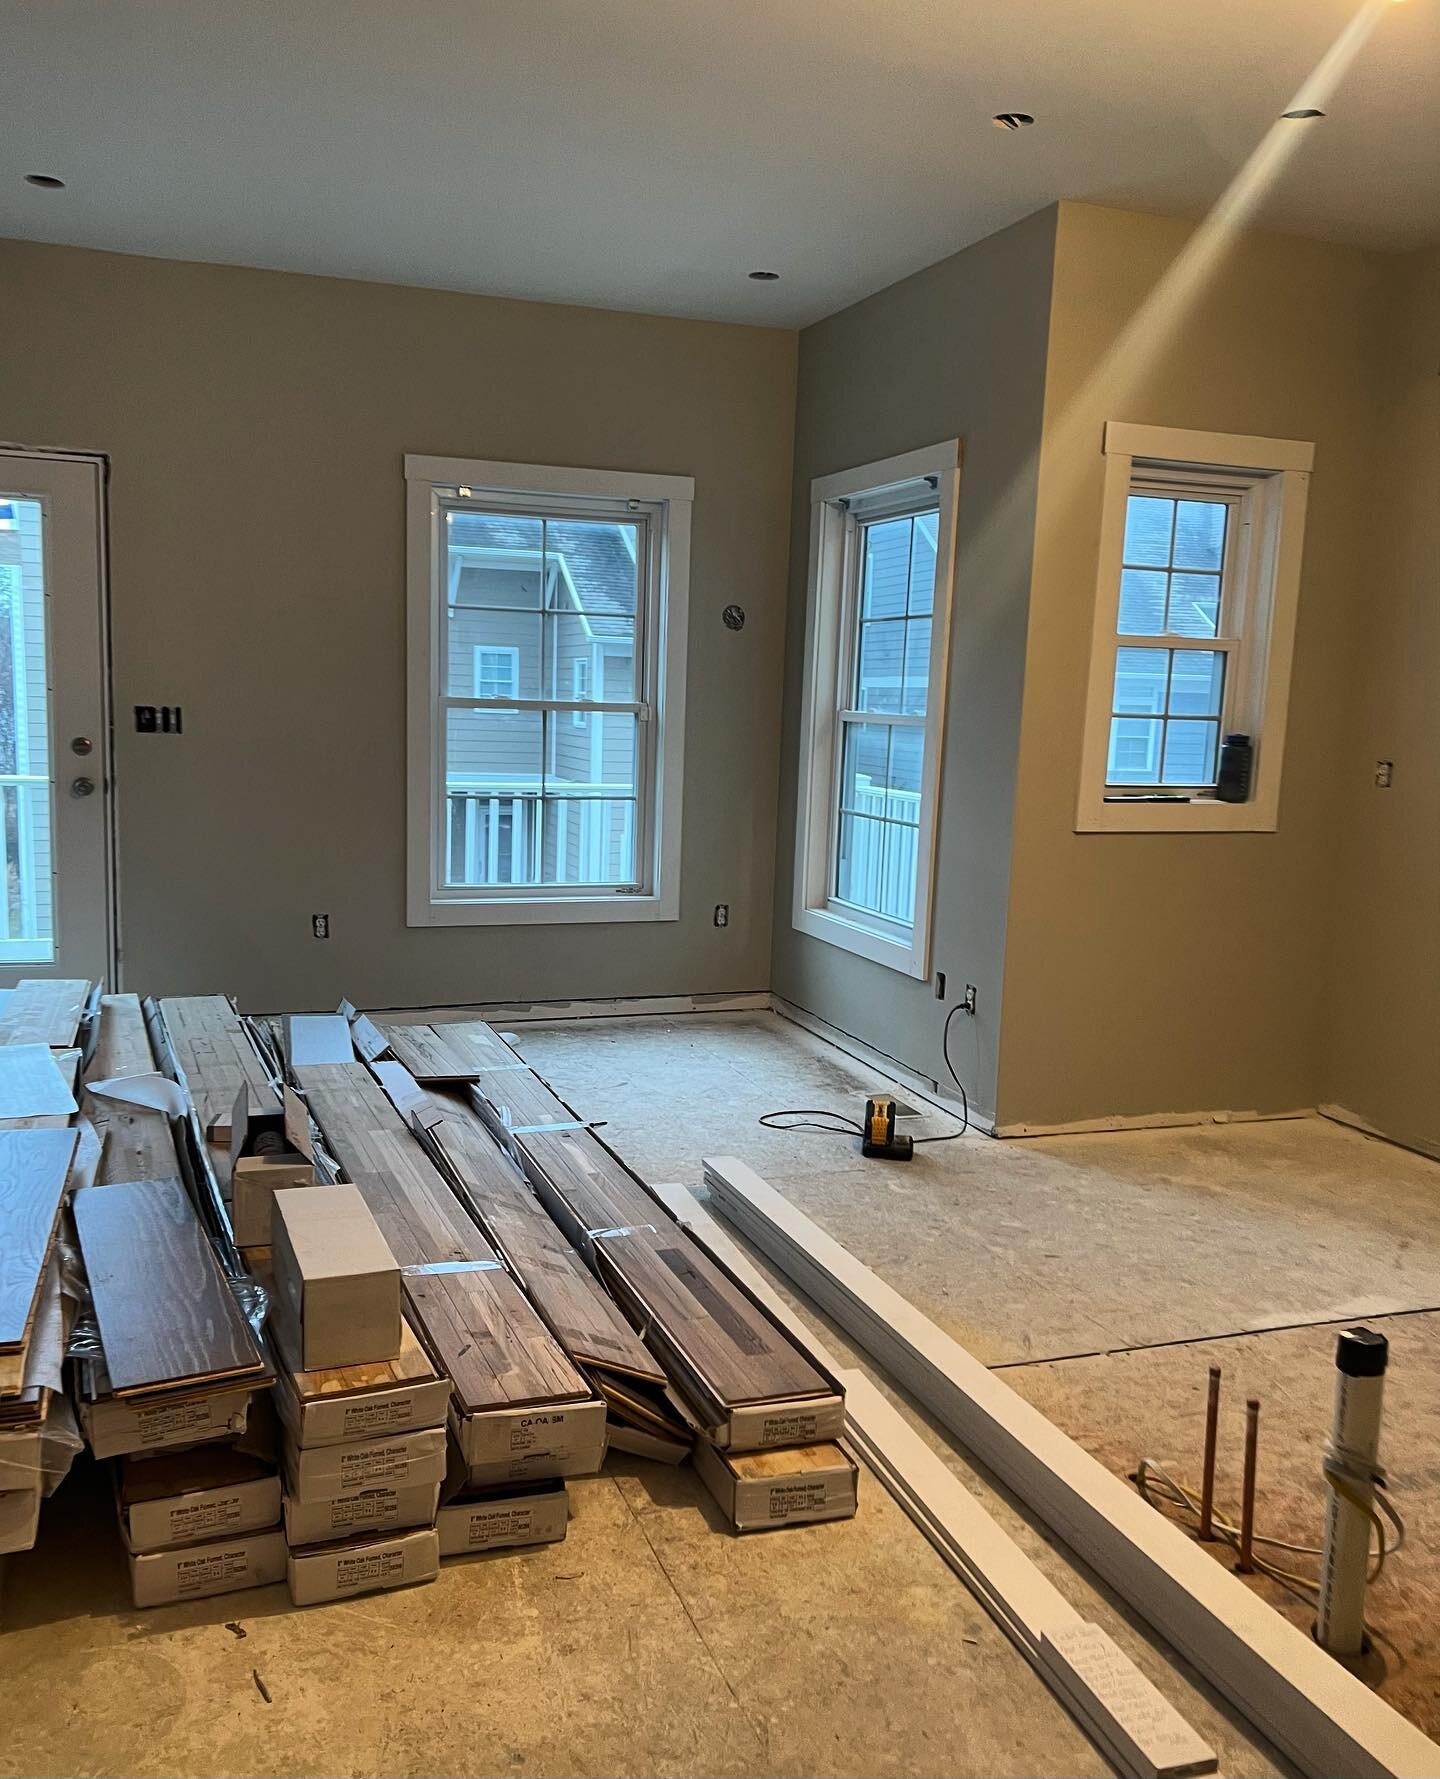 Our Mid Town condo remodel is coming right along. Flooring is getting ready to be laid and painting is wrapping up. It won&rsquo;t be long and we&rsquo;ll be installing this one! 

#remodel #flooringinstallation #tileinstallation #midtowncondo #trave